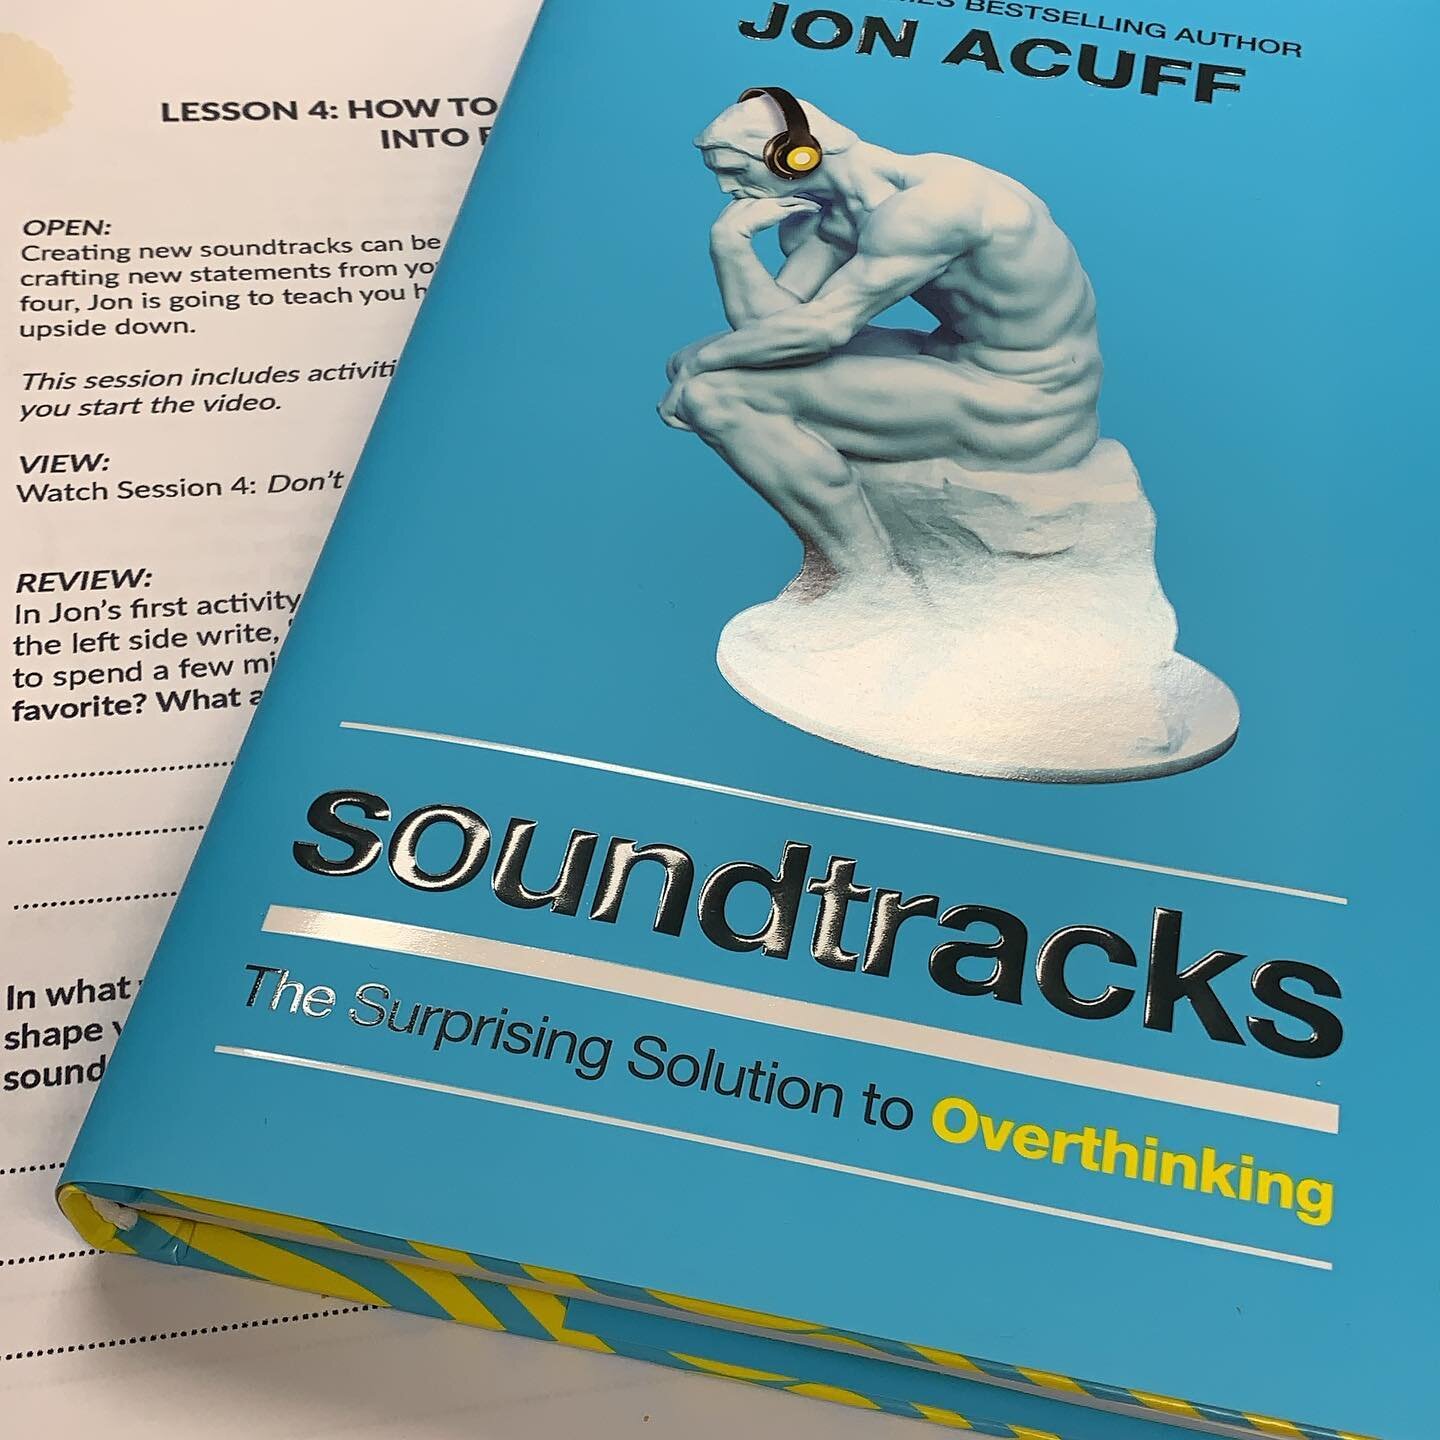 People! You&rsquo;re the DJ of the music in your head! Choose your own solid playlist. Need help with that? This!
#soundtracks #soundtracksbook #soundtrackscourse #changeyourmindset #changeyourthoughts #changeyourlife 
Bonus: @jonacuff is funny and s